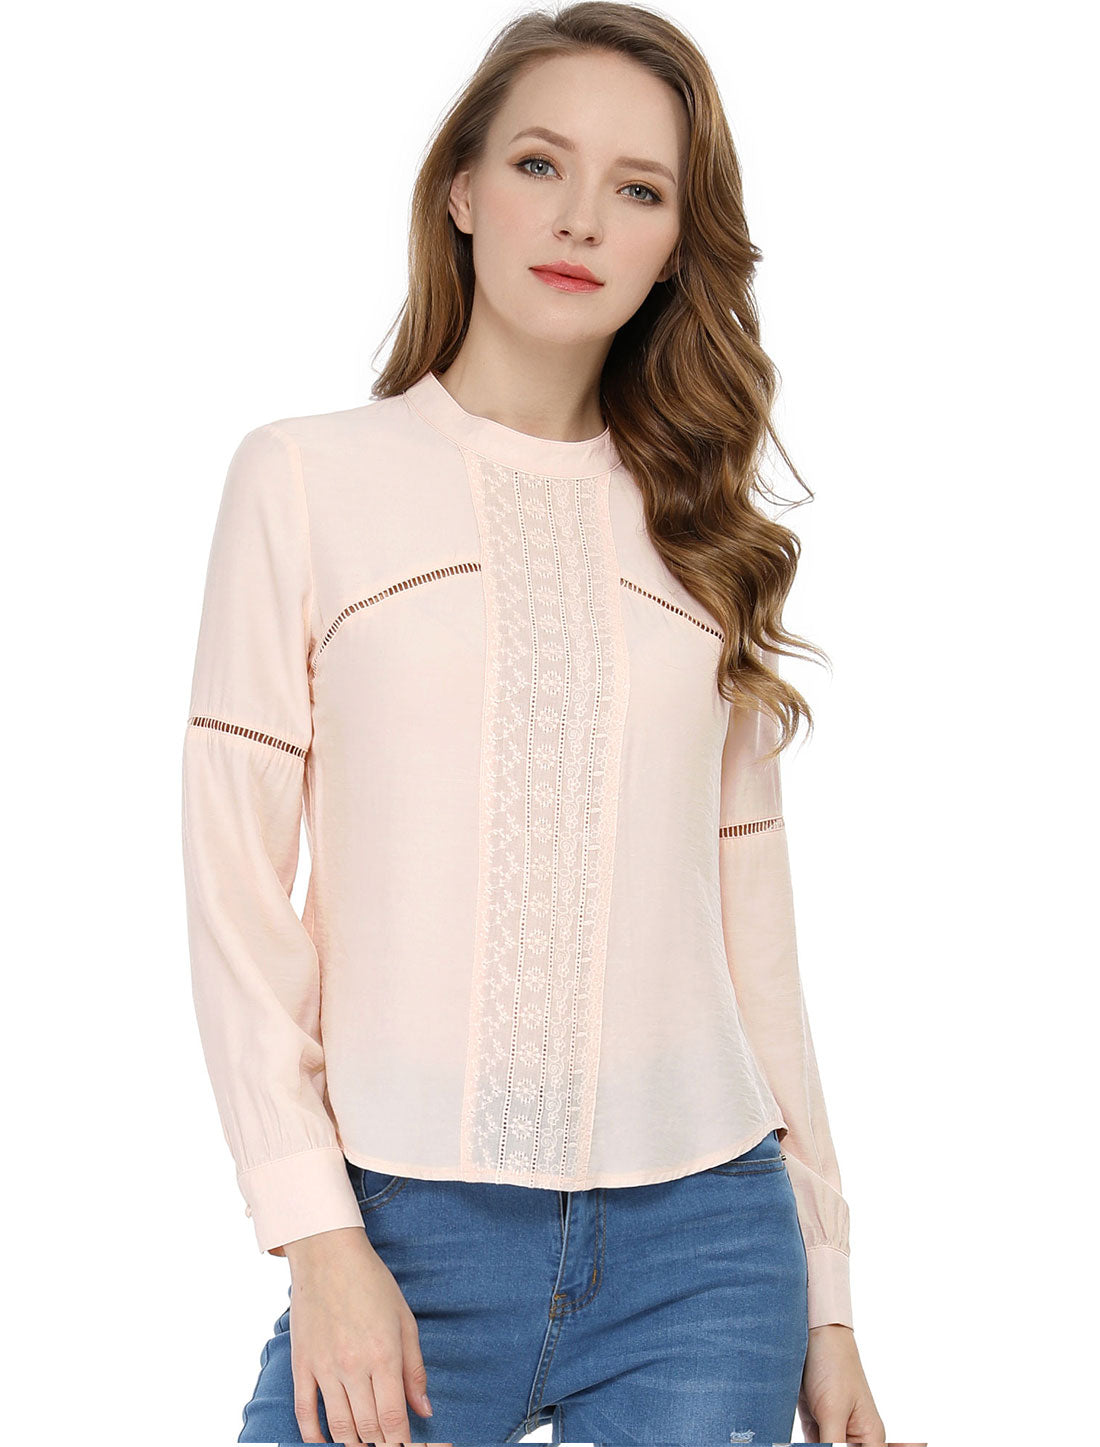 Allegra K Floral Embroidery Long Sleeve Blouse Mock Neck Casual Peasant Top